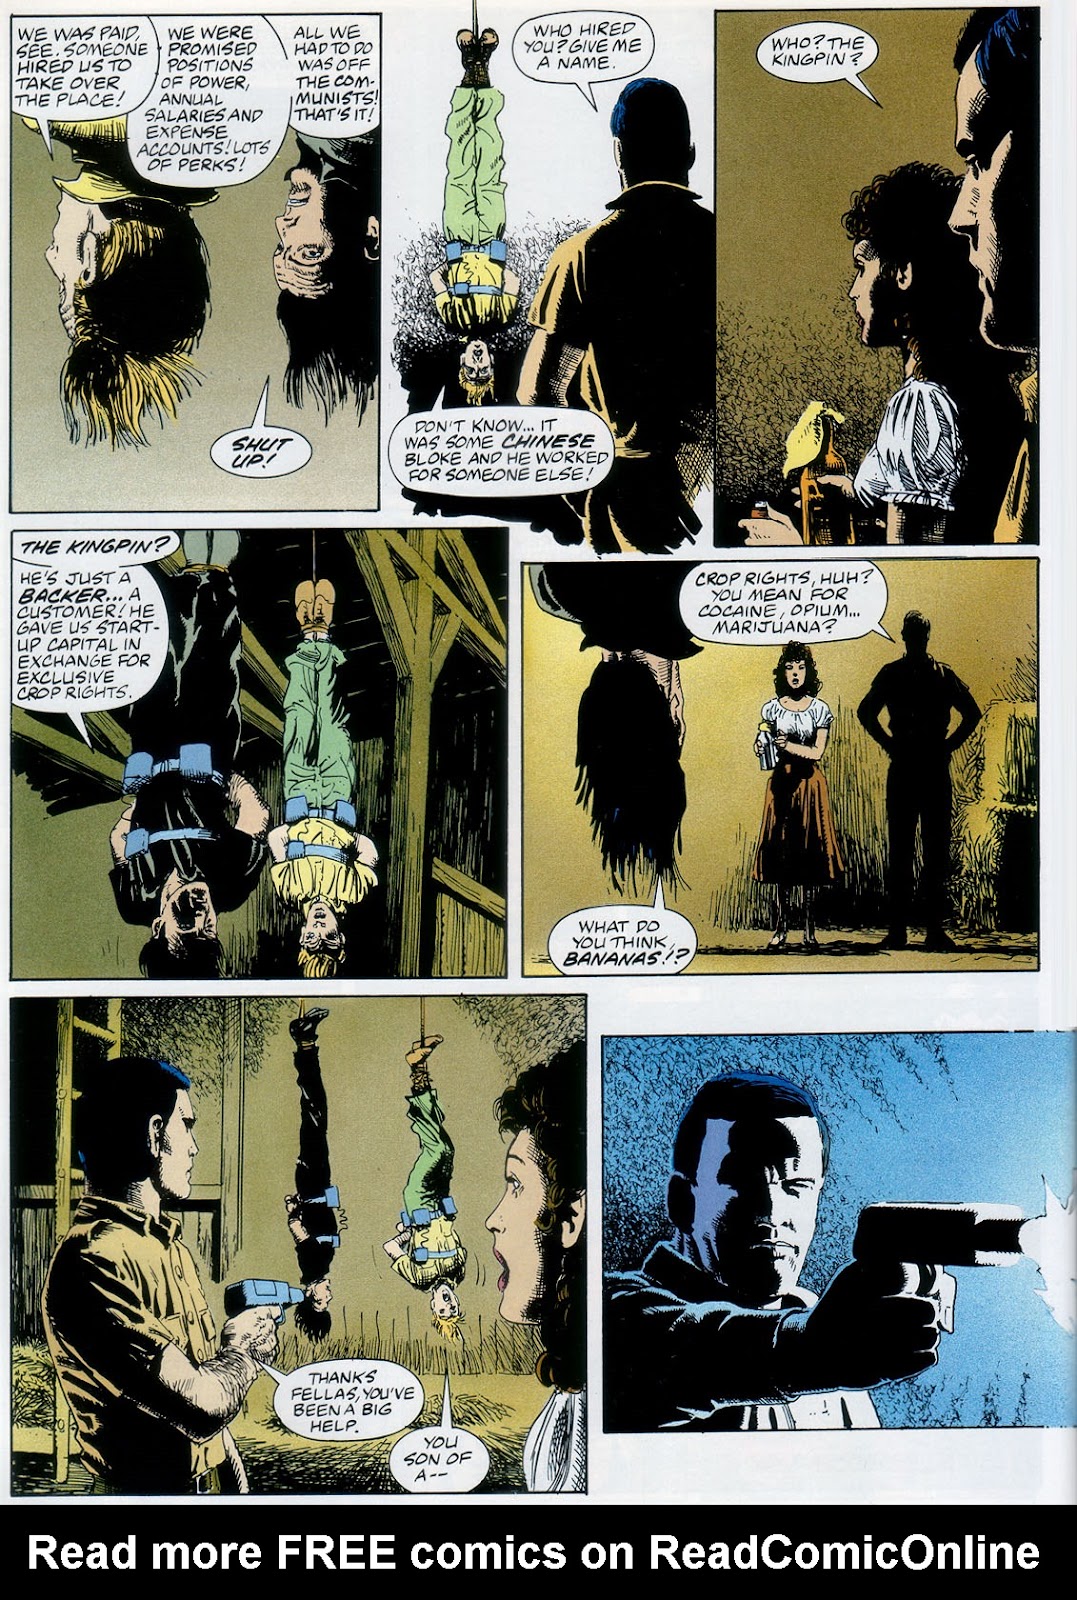 Marvel Graphic Novel issue 57 - Rick Mason - The Agent - Page 44